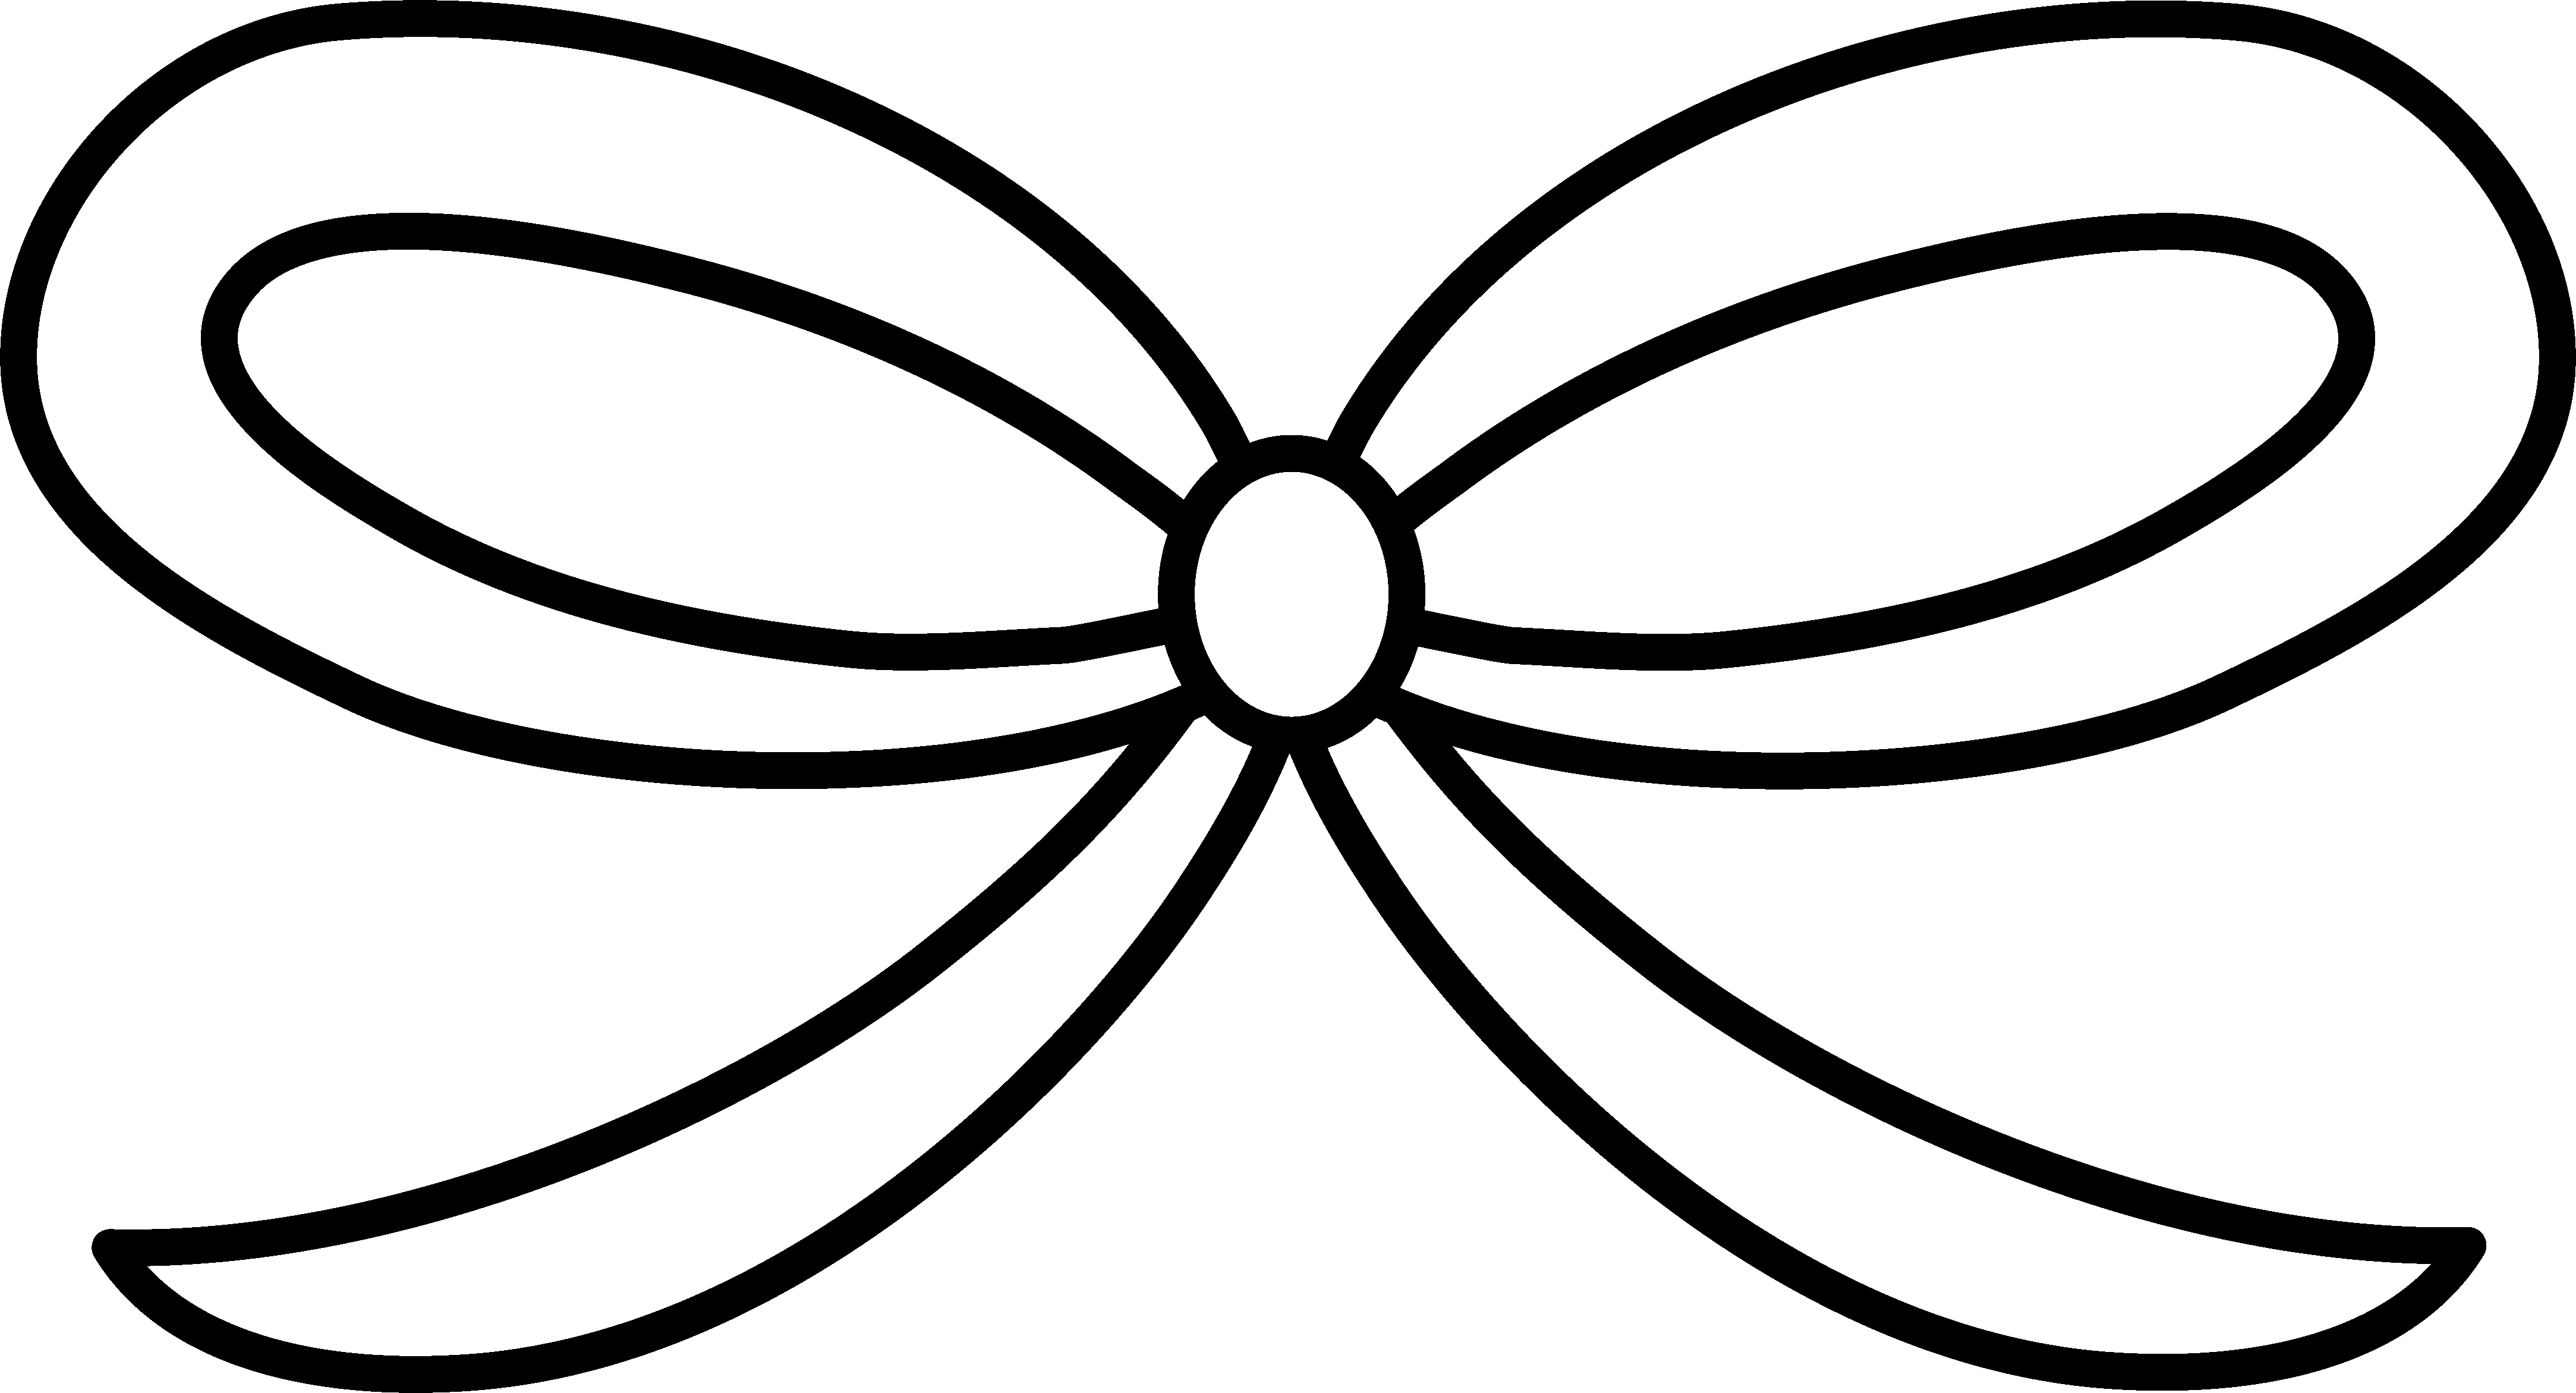 Bow Coloring Pages Hair Bow Coloring Page At Getdrawings Free For Personal Use